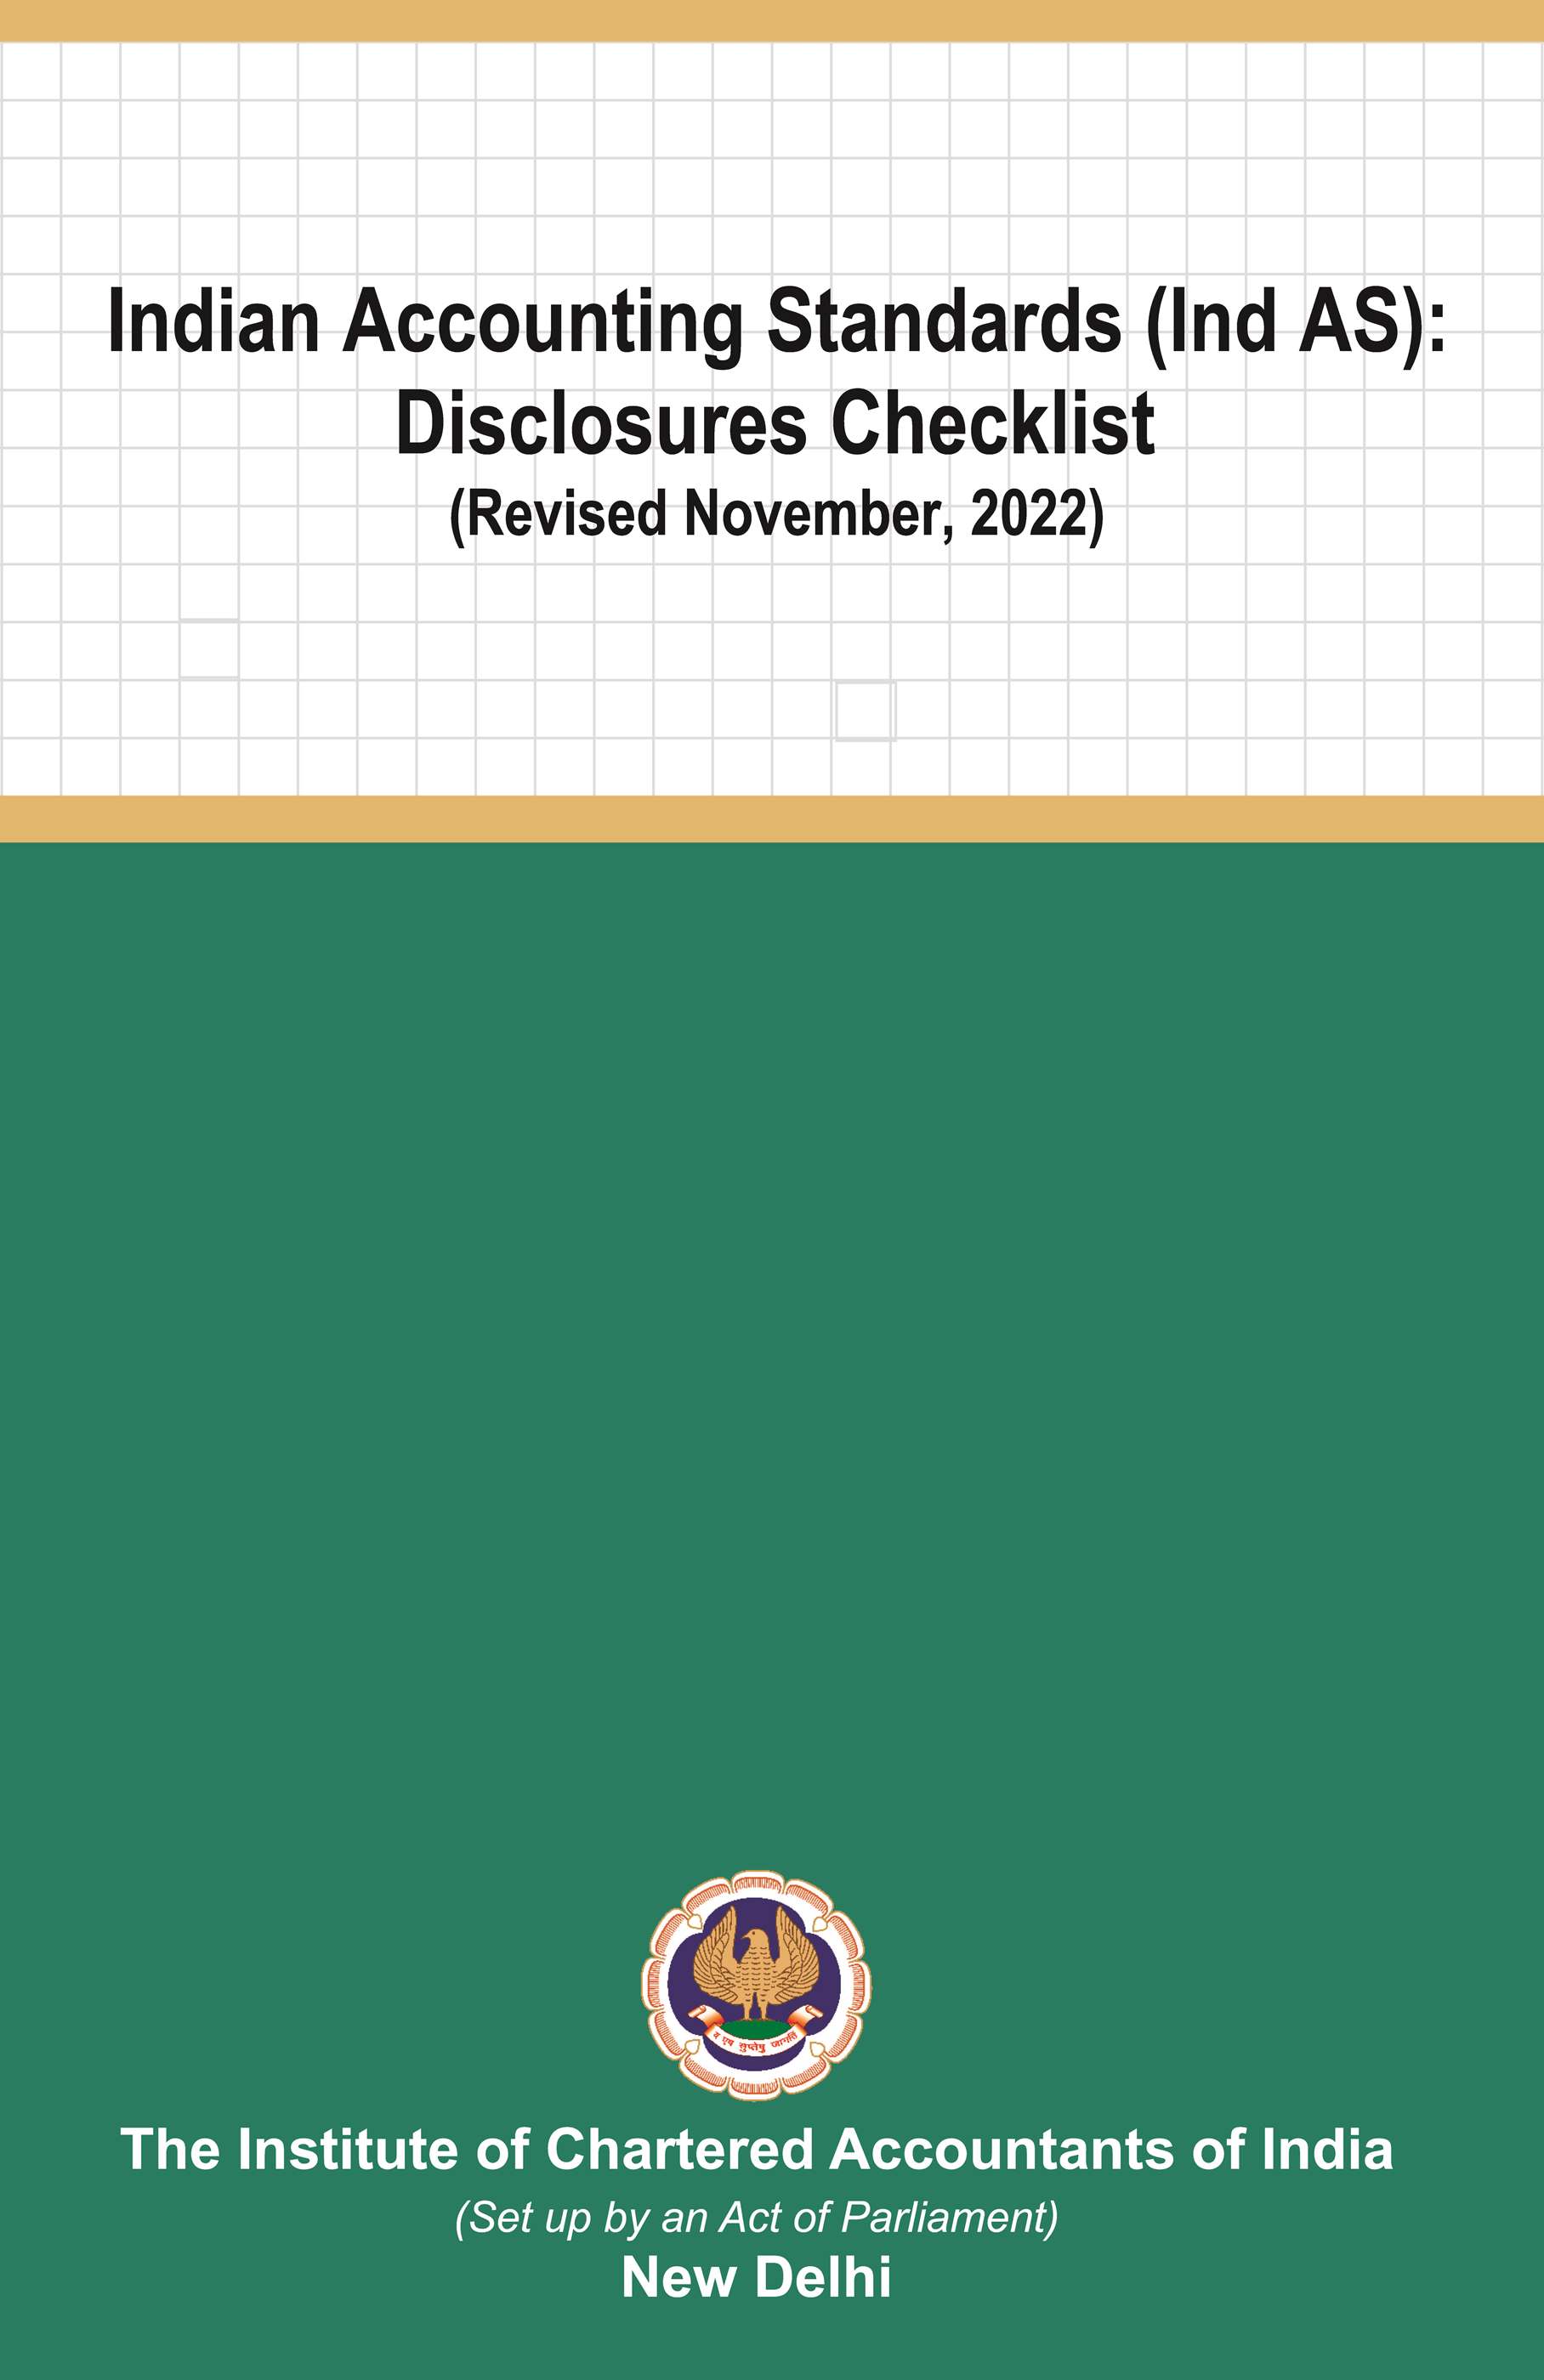 Indian Accounting Standards (Ind AS): Disclosures Checklist (Revised November 2022)